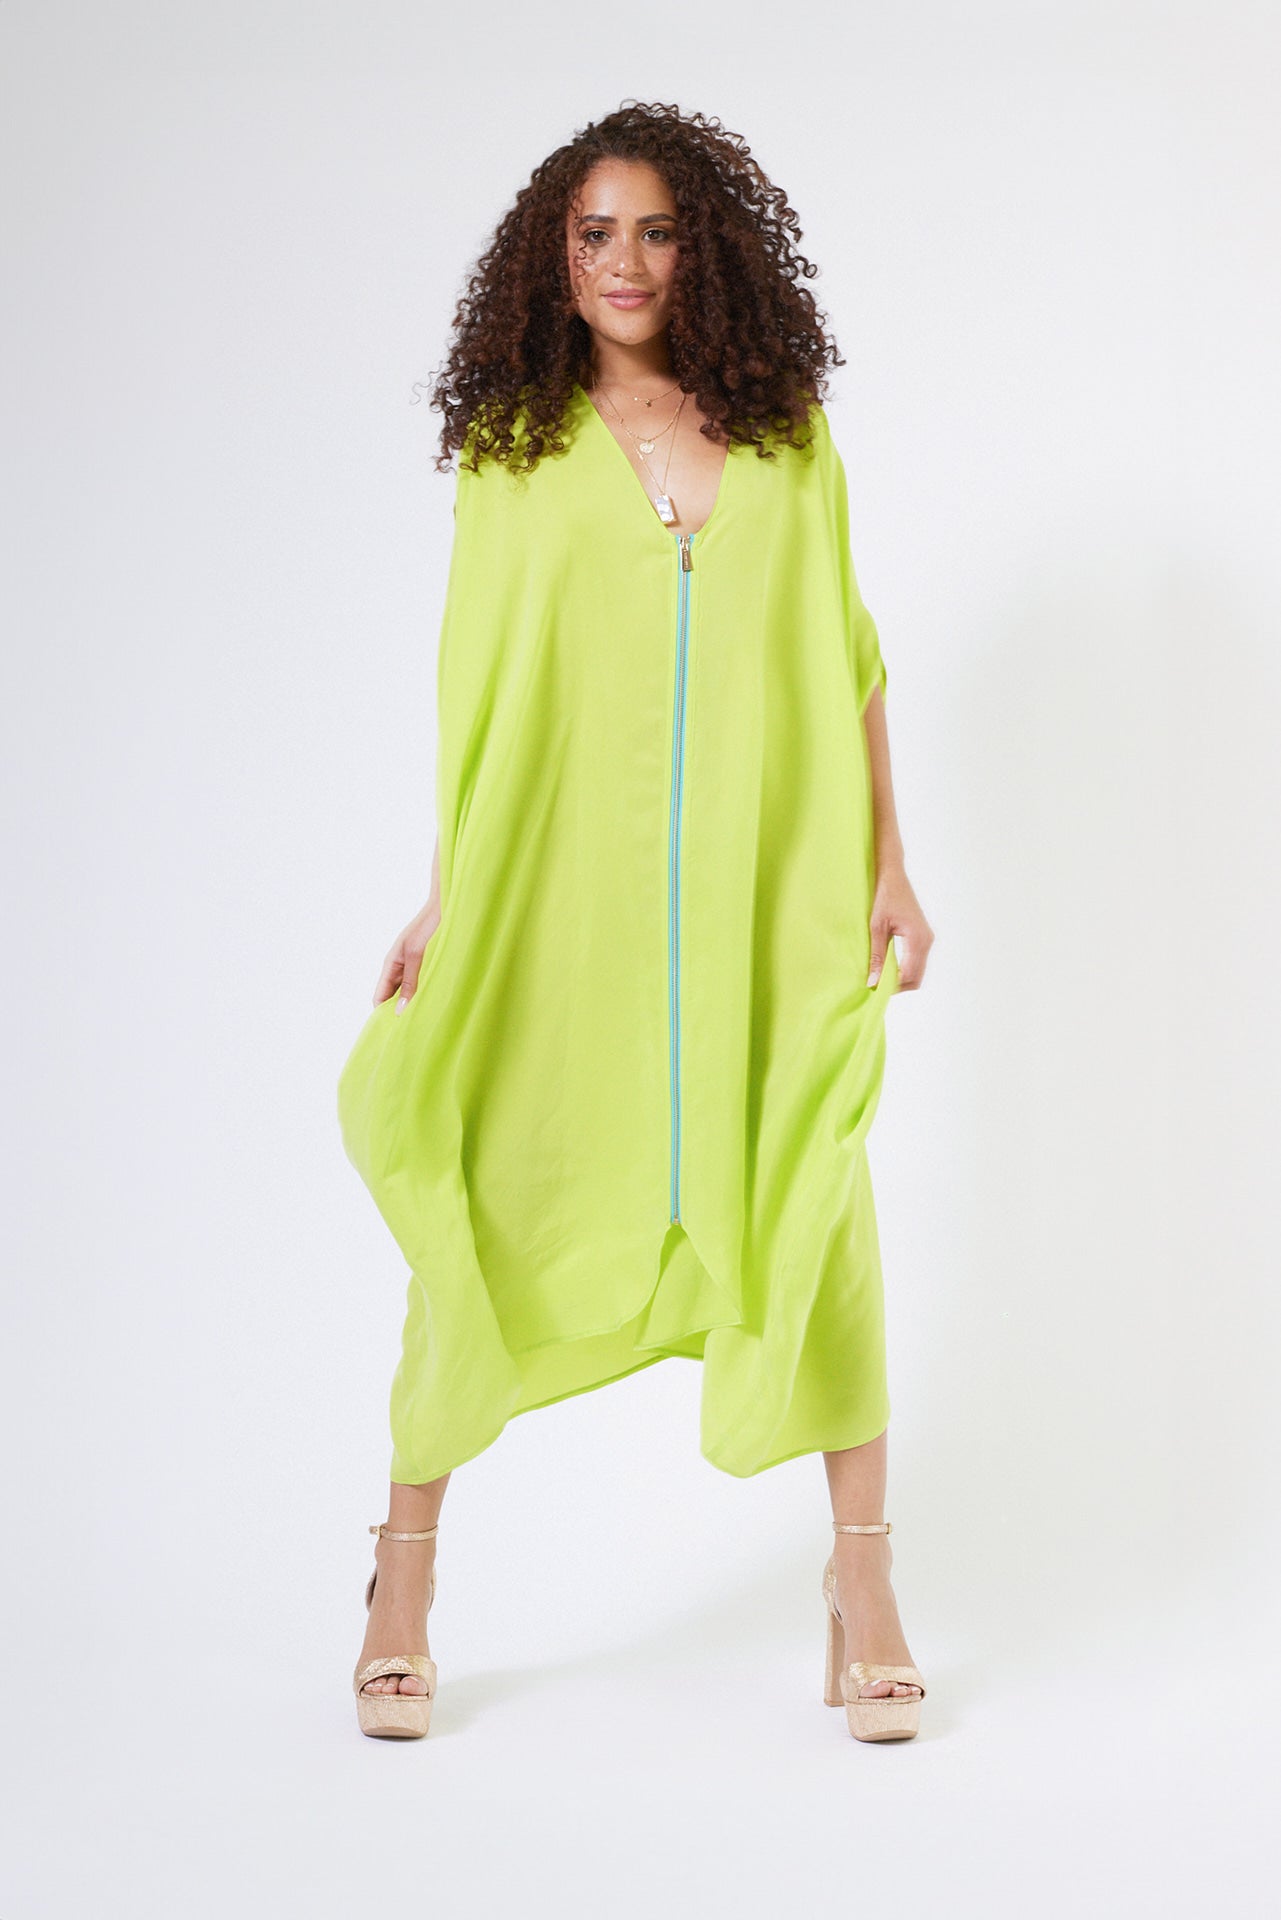 woman wearing bright yellow kaftan duster with front zipper made from recycled materials